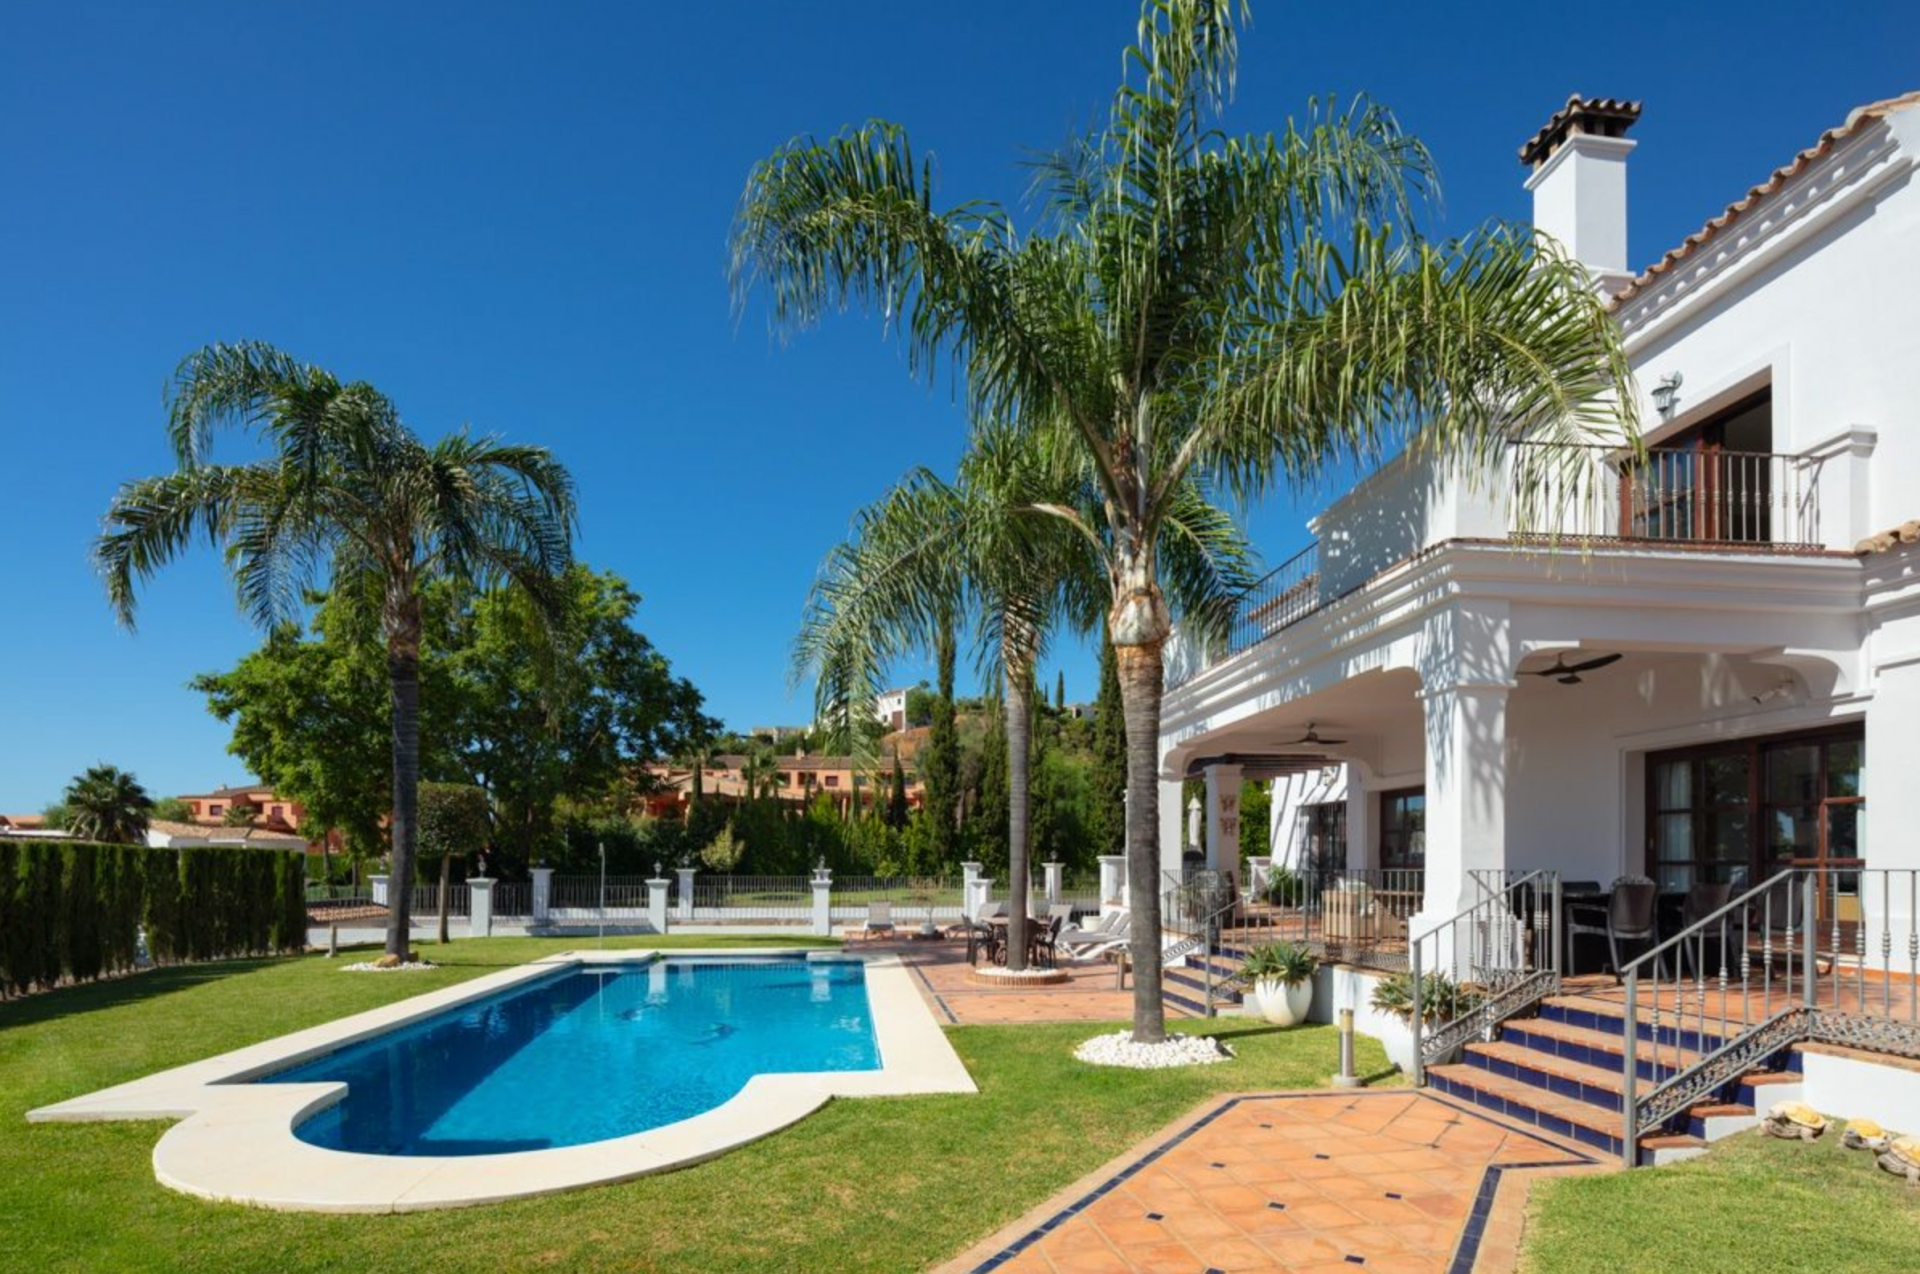 Spectacular villa in the heart of Paraiso Alto distributed over three levels and set on a large 1800m2 plot allowing for ample garden space as well as a large pool